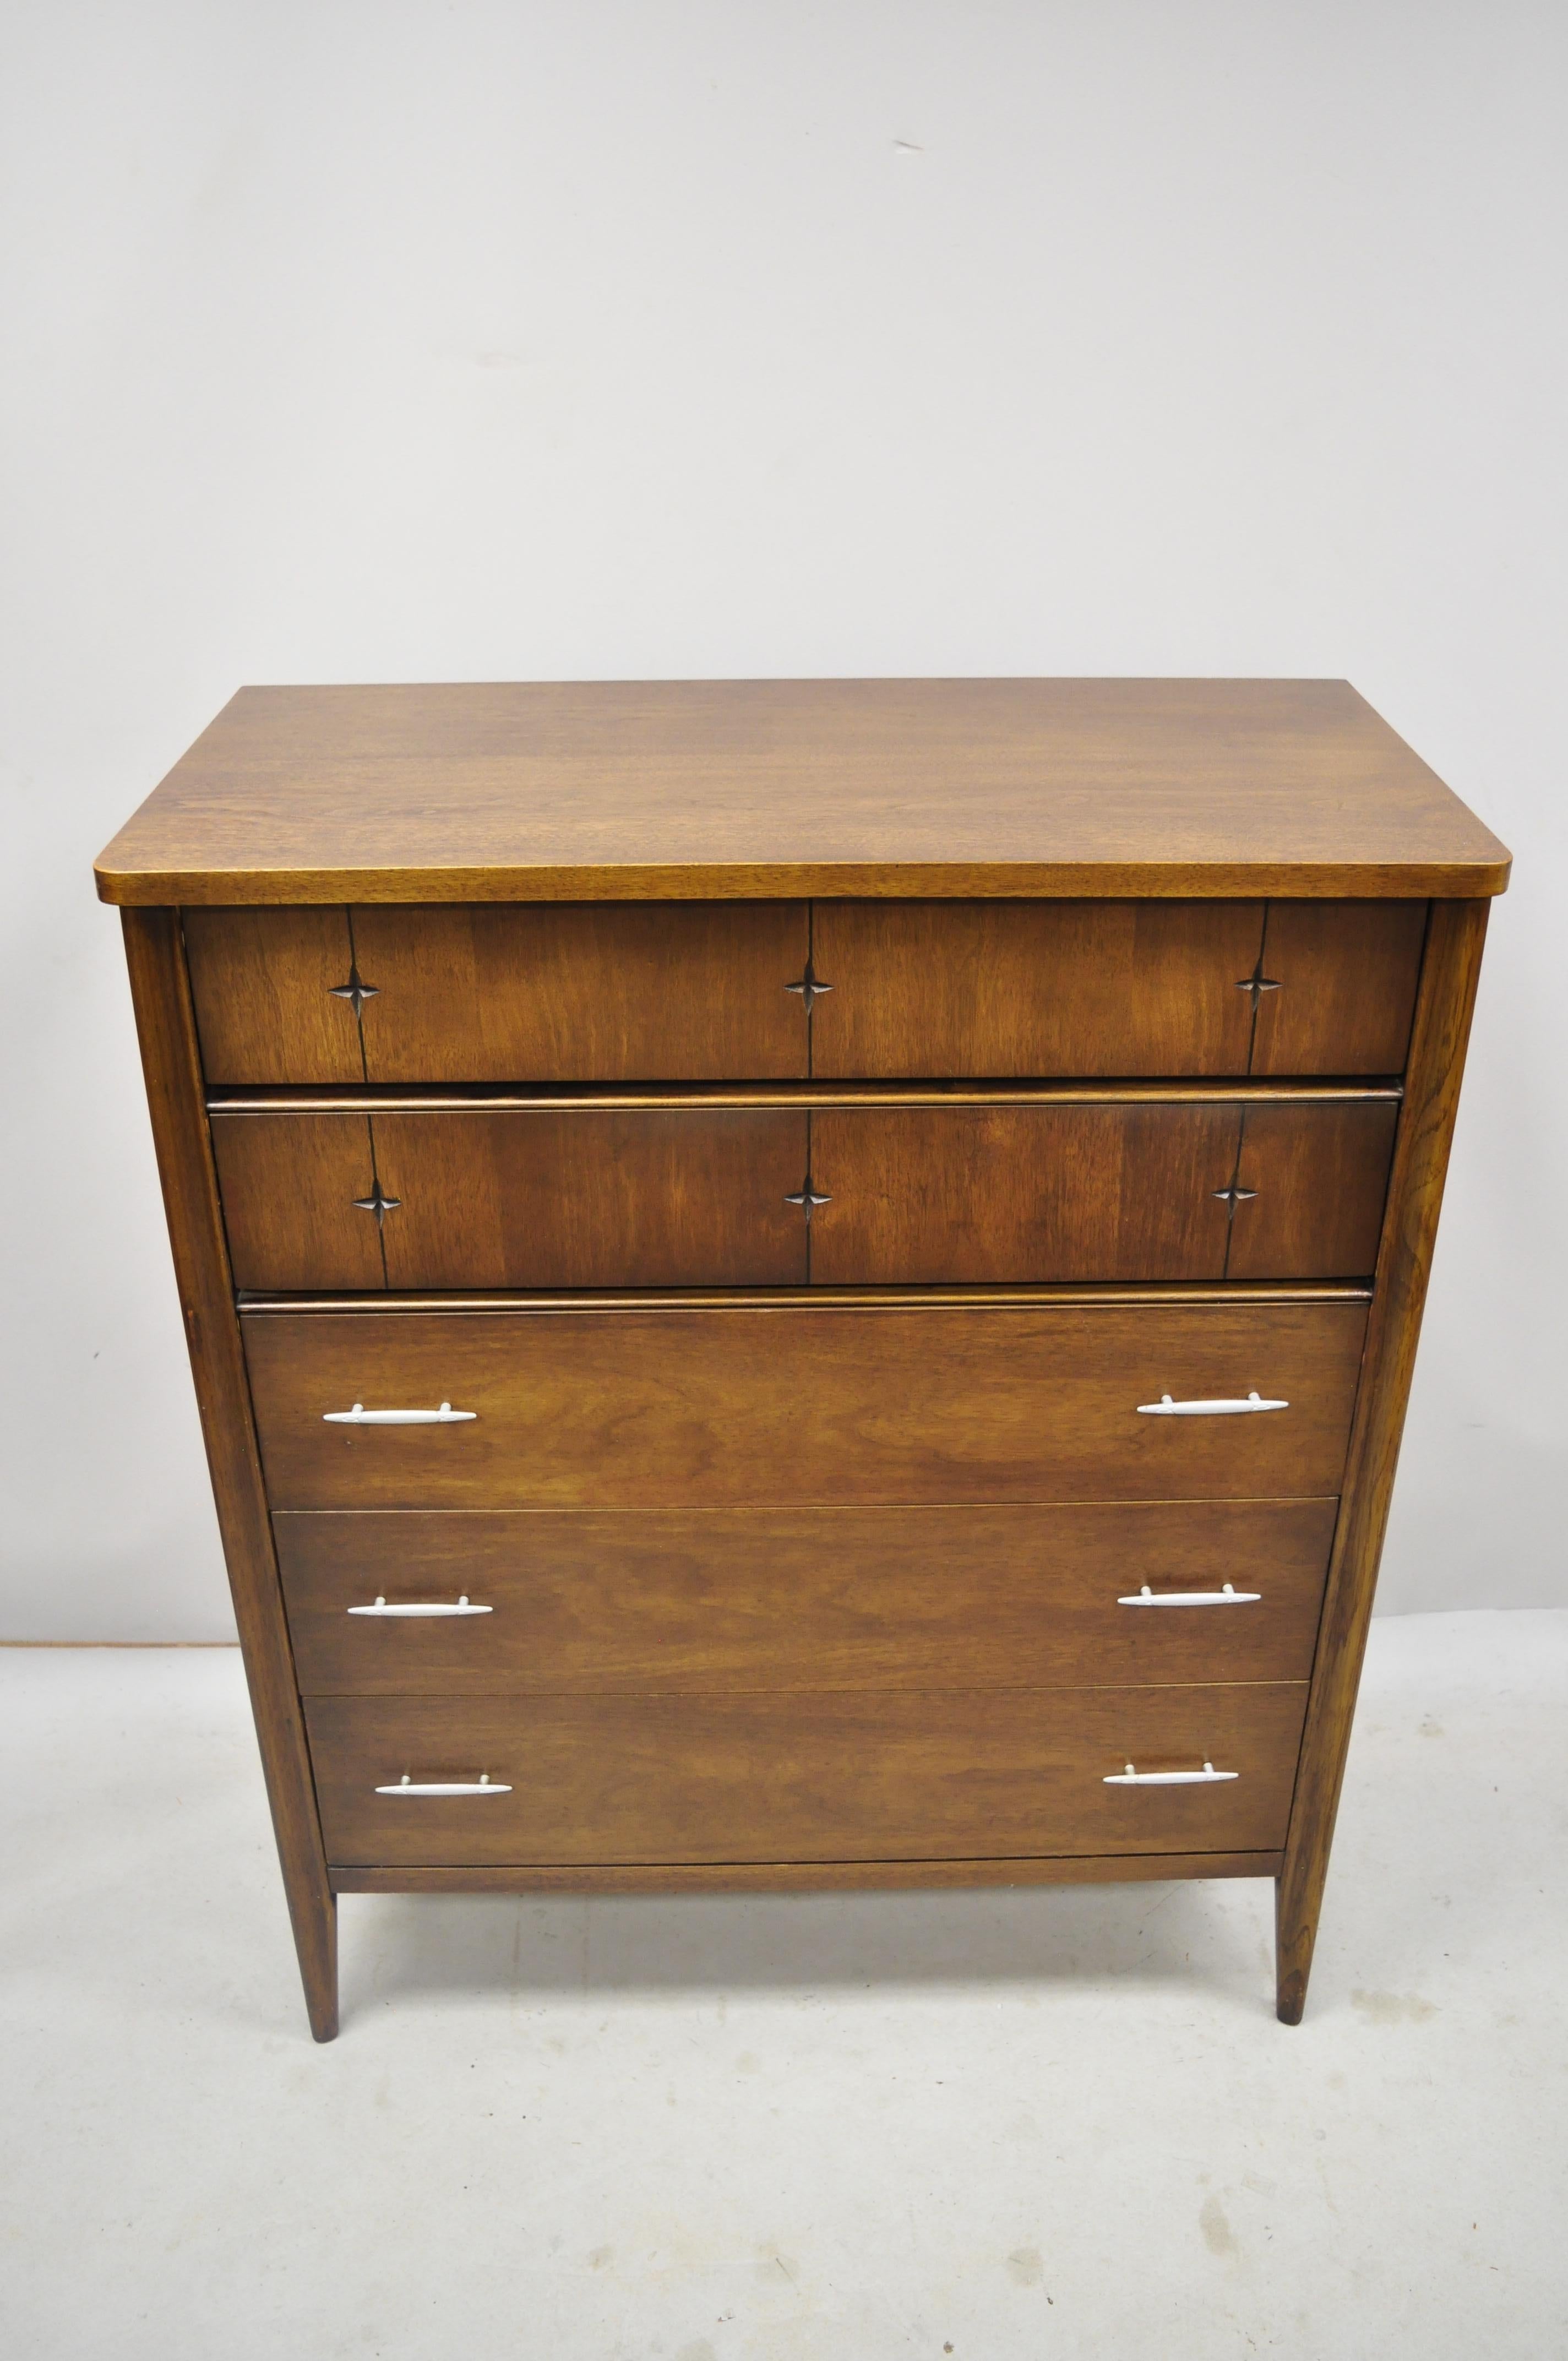 Vintage Broyhill Saga Mid-Century Modern walnut carved star tall chest dresser. Item includes carved star drawer fronts, beautiful wood grain, 5 dovetailed drawers, tapered legs, sleek sculptural form, circa mid-20th century. Measurements: 46.5